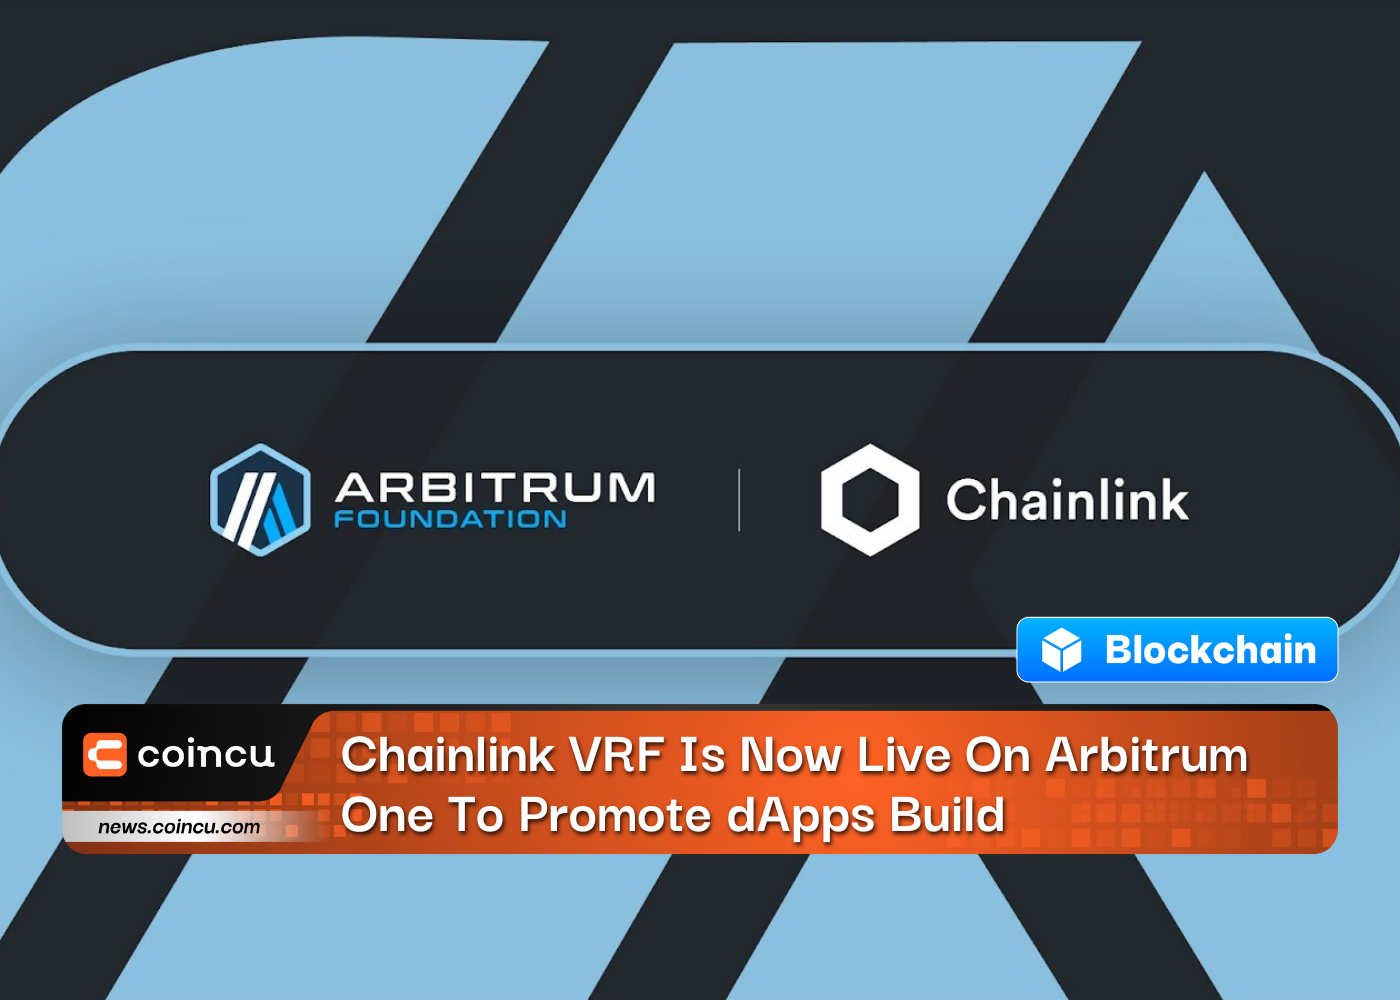 Chainlink VRF Is Now Live On Arbitrum One To Promote dApps Build